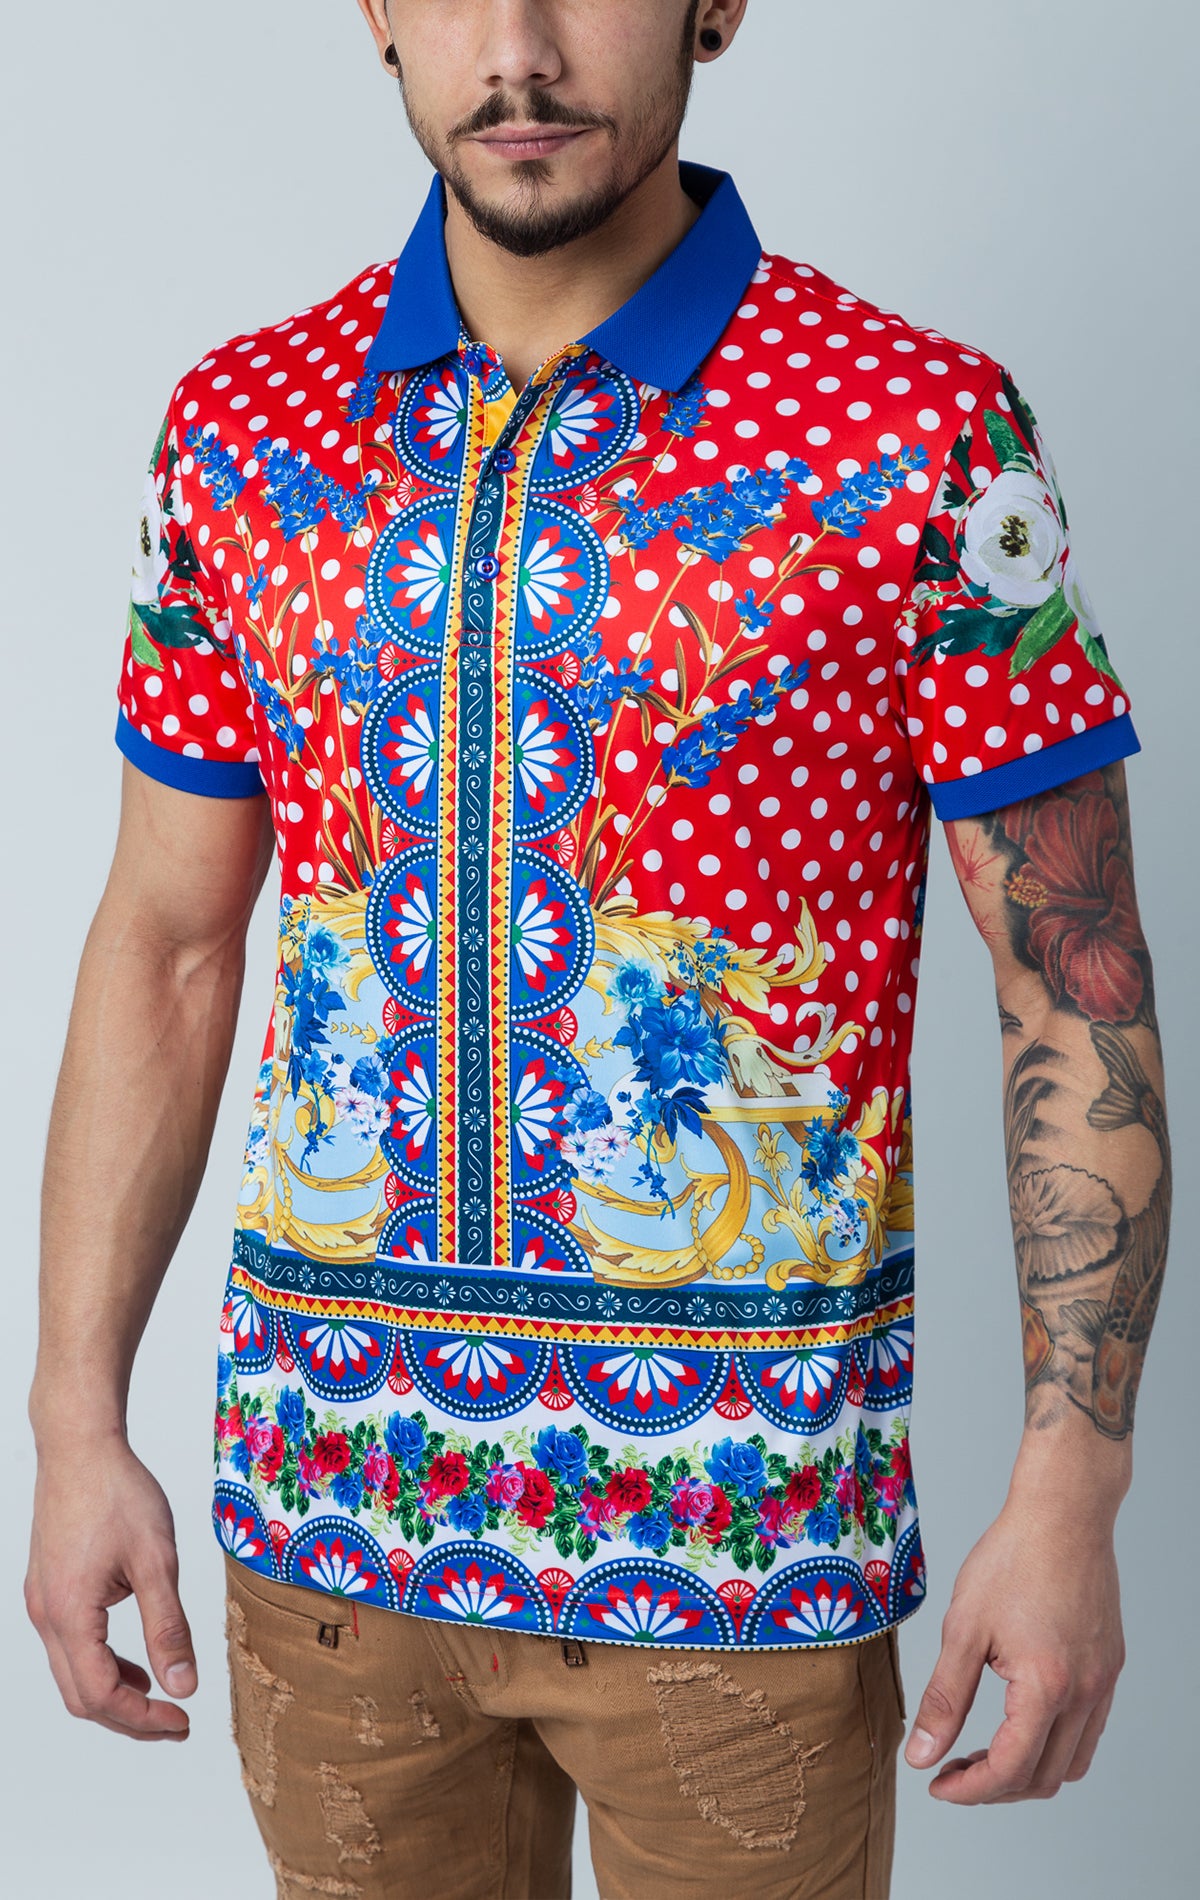 polo shirt adorned with a beautiful floral print